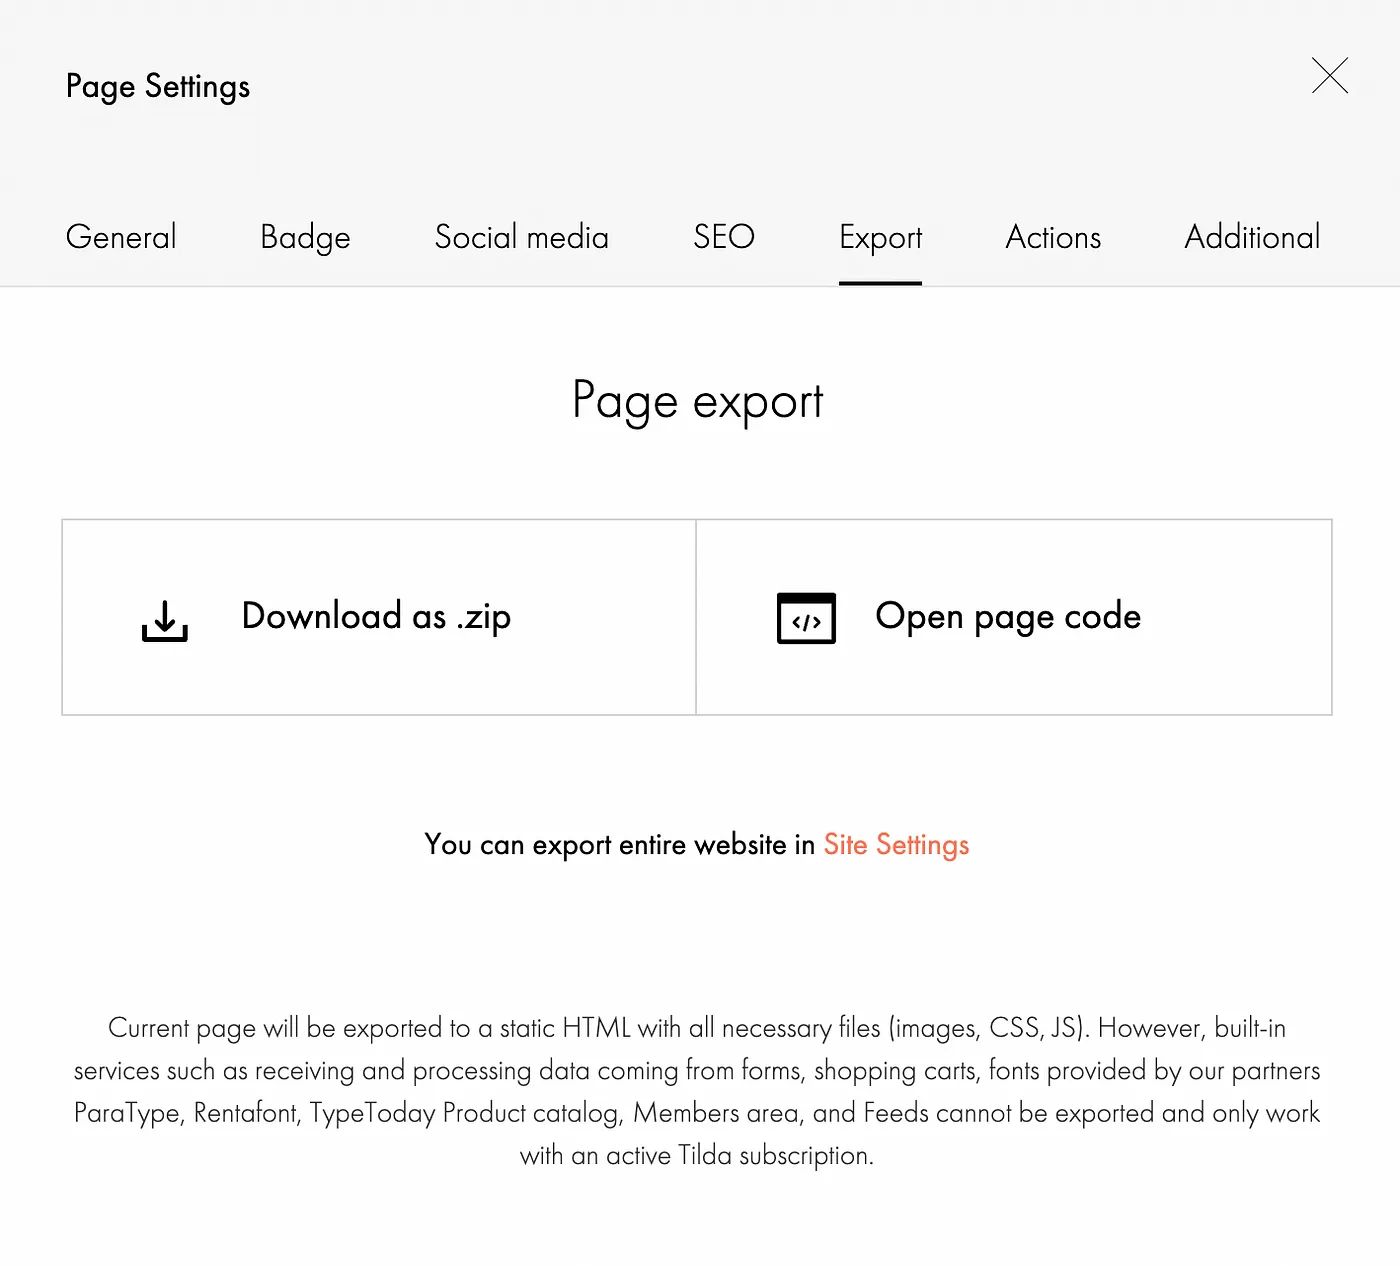 Tilda allows exporting files from the page settings